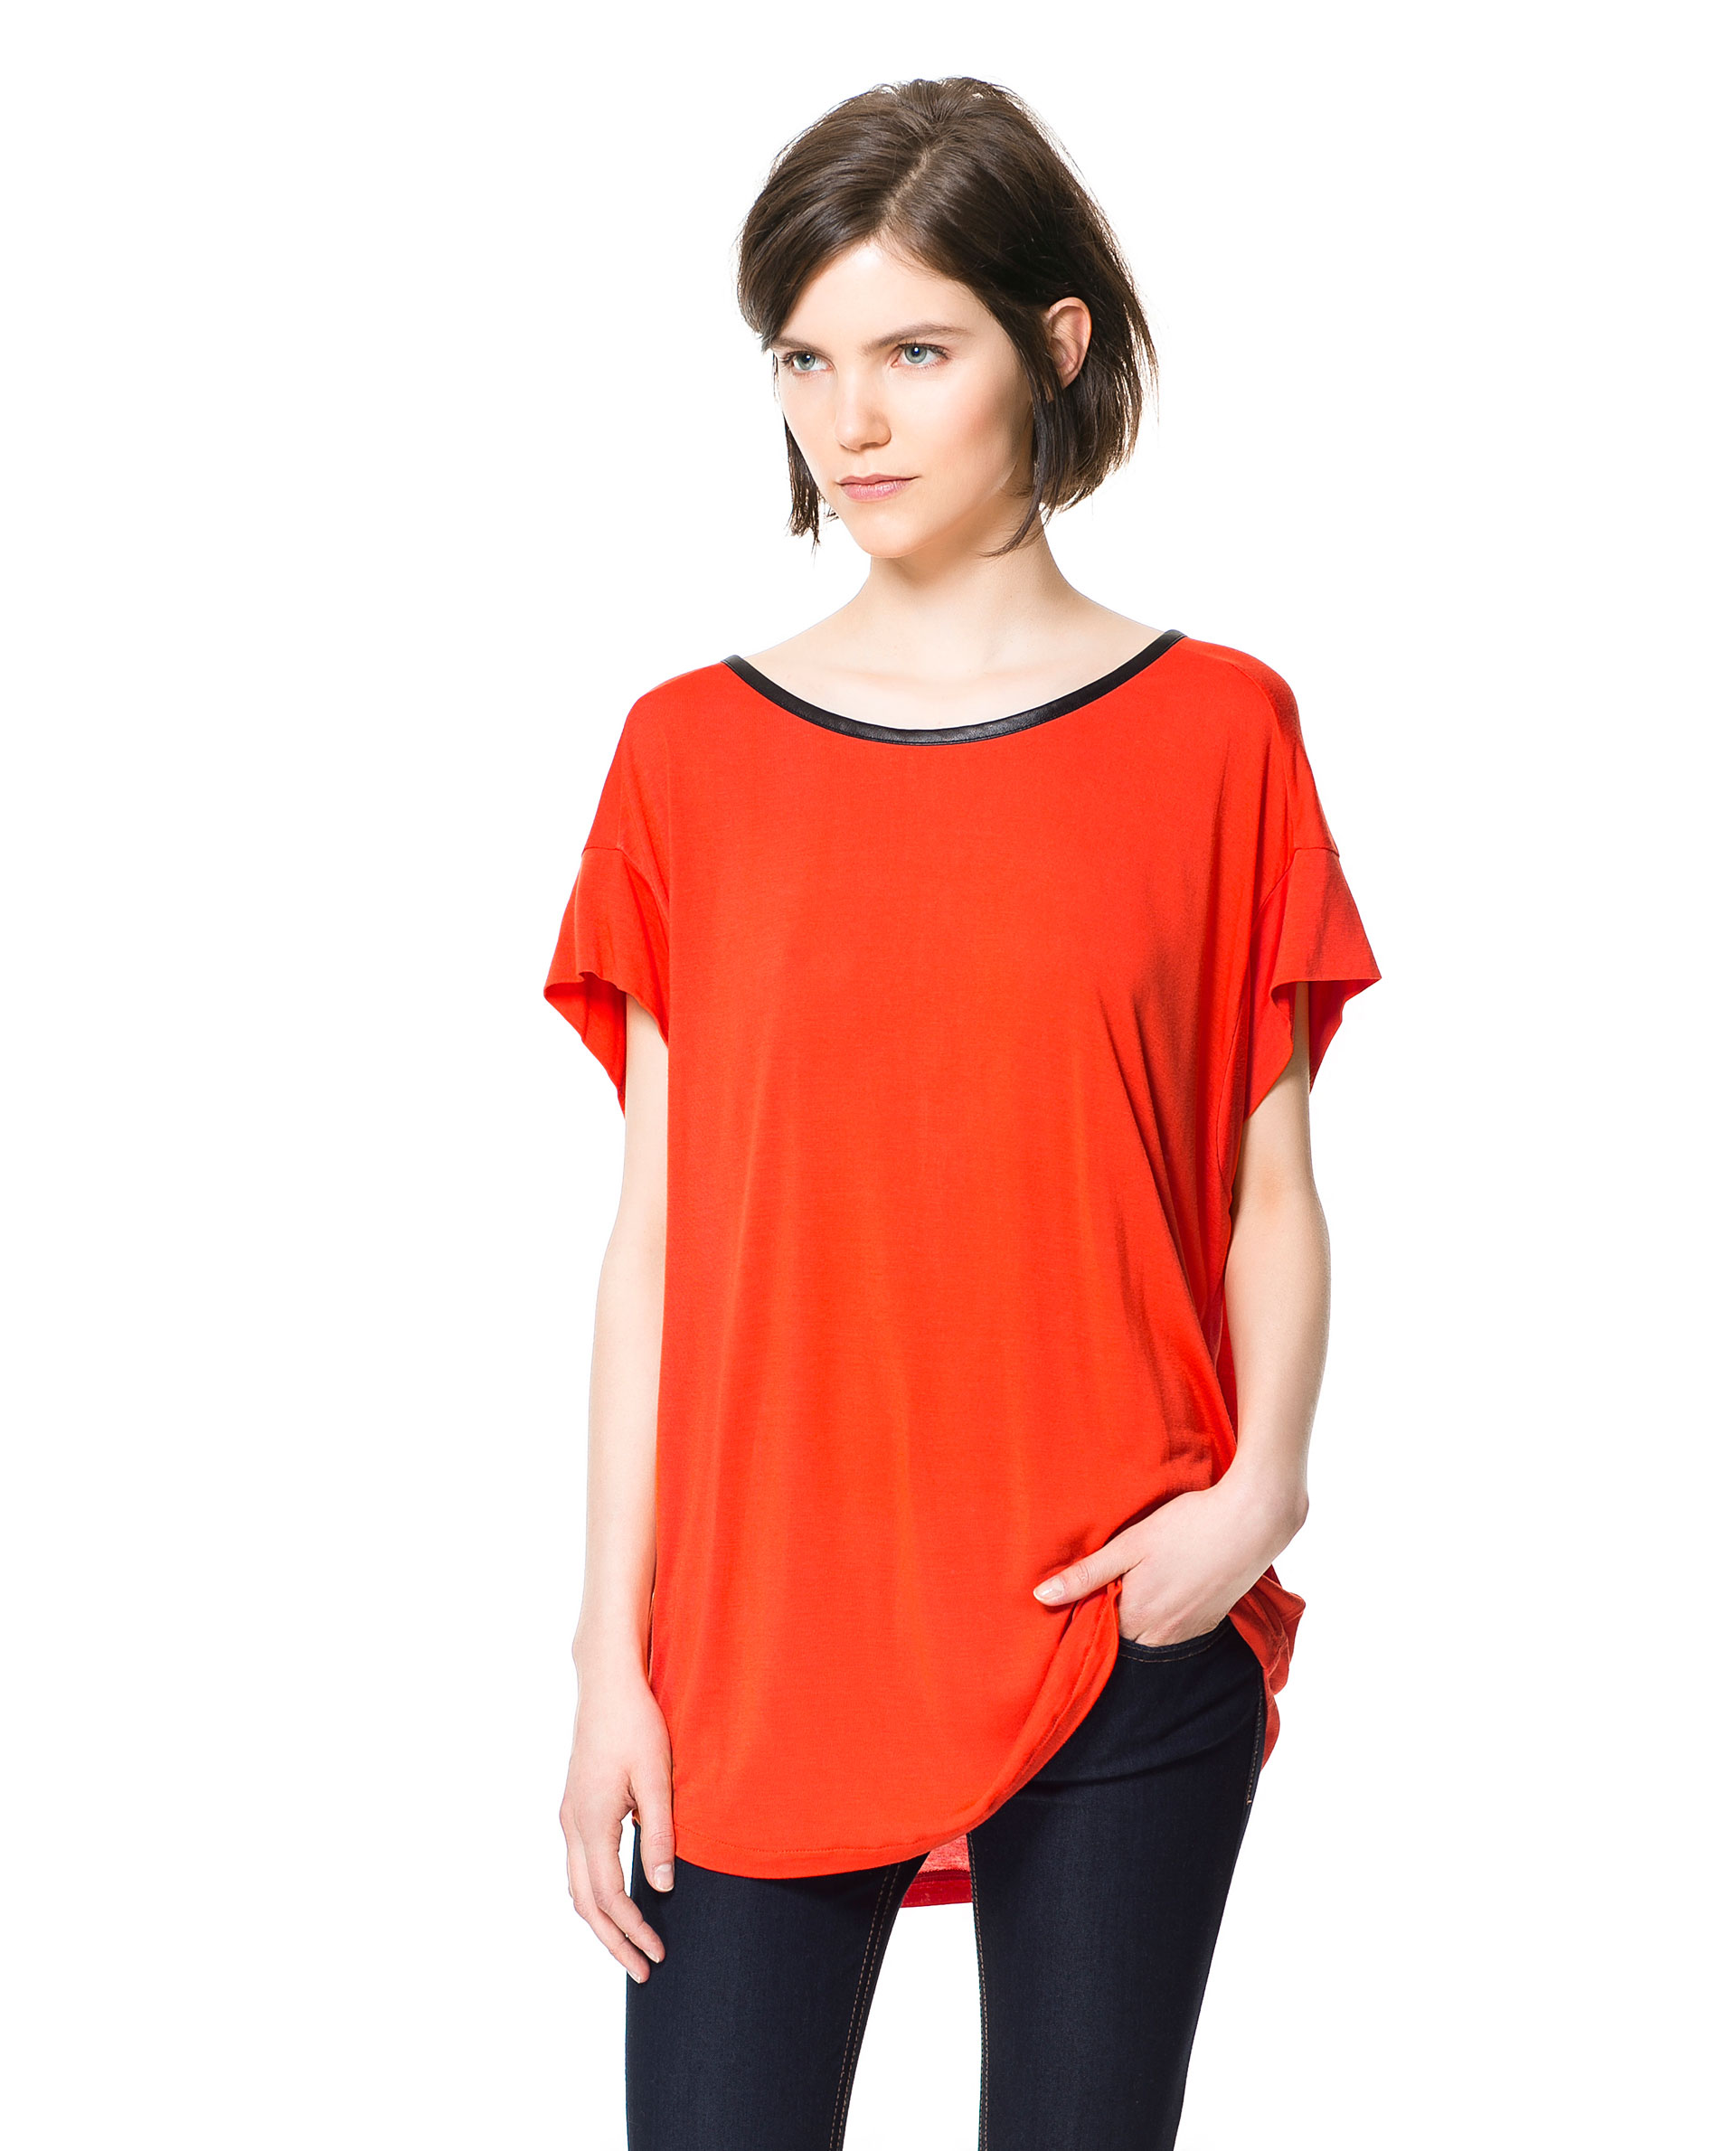 Zara Tshirt with Faux Leather Neckline and Back Zip in Orange | Lyst